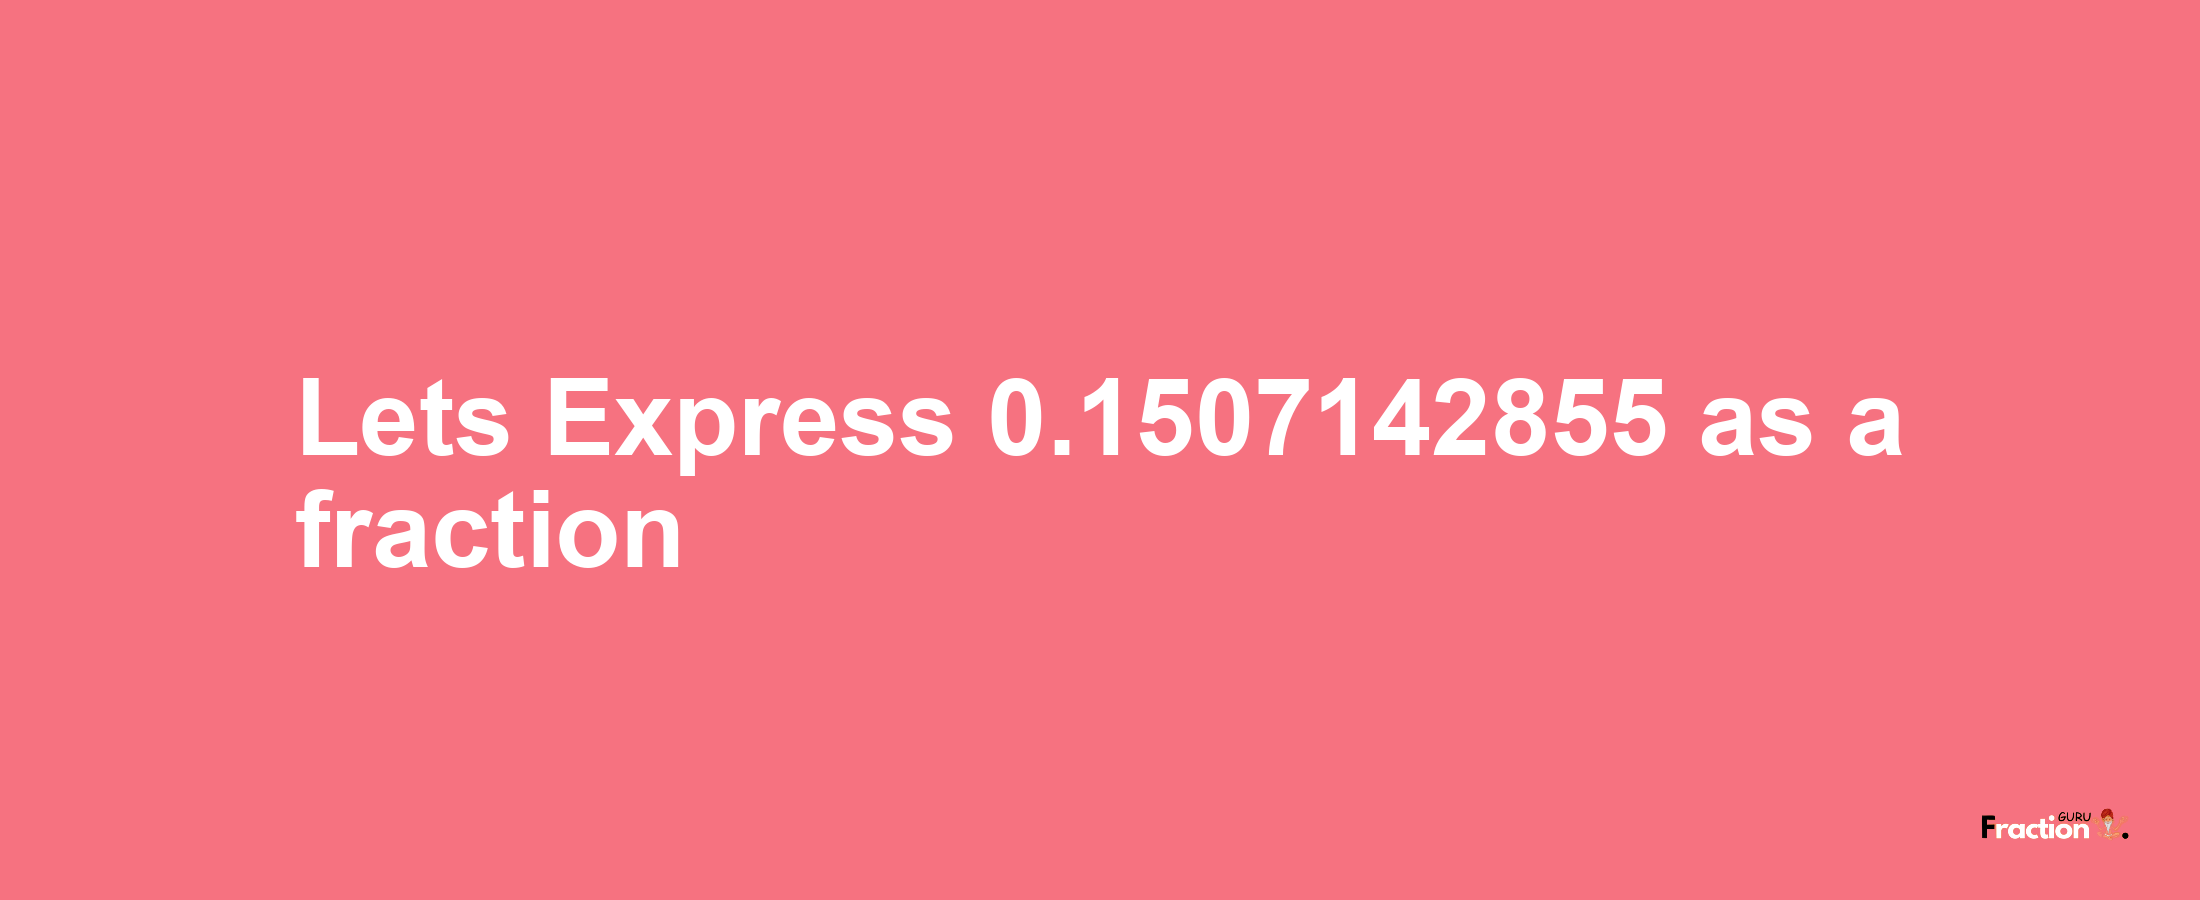 Lets Express 0.1507142855 as afraction